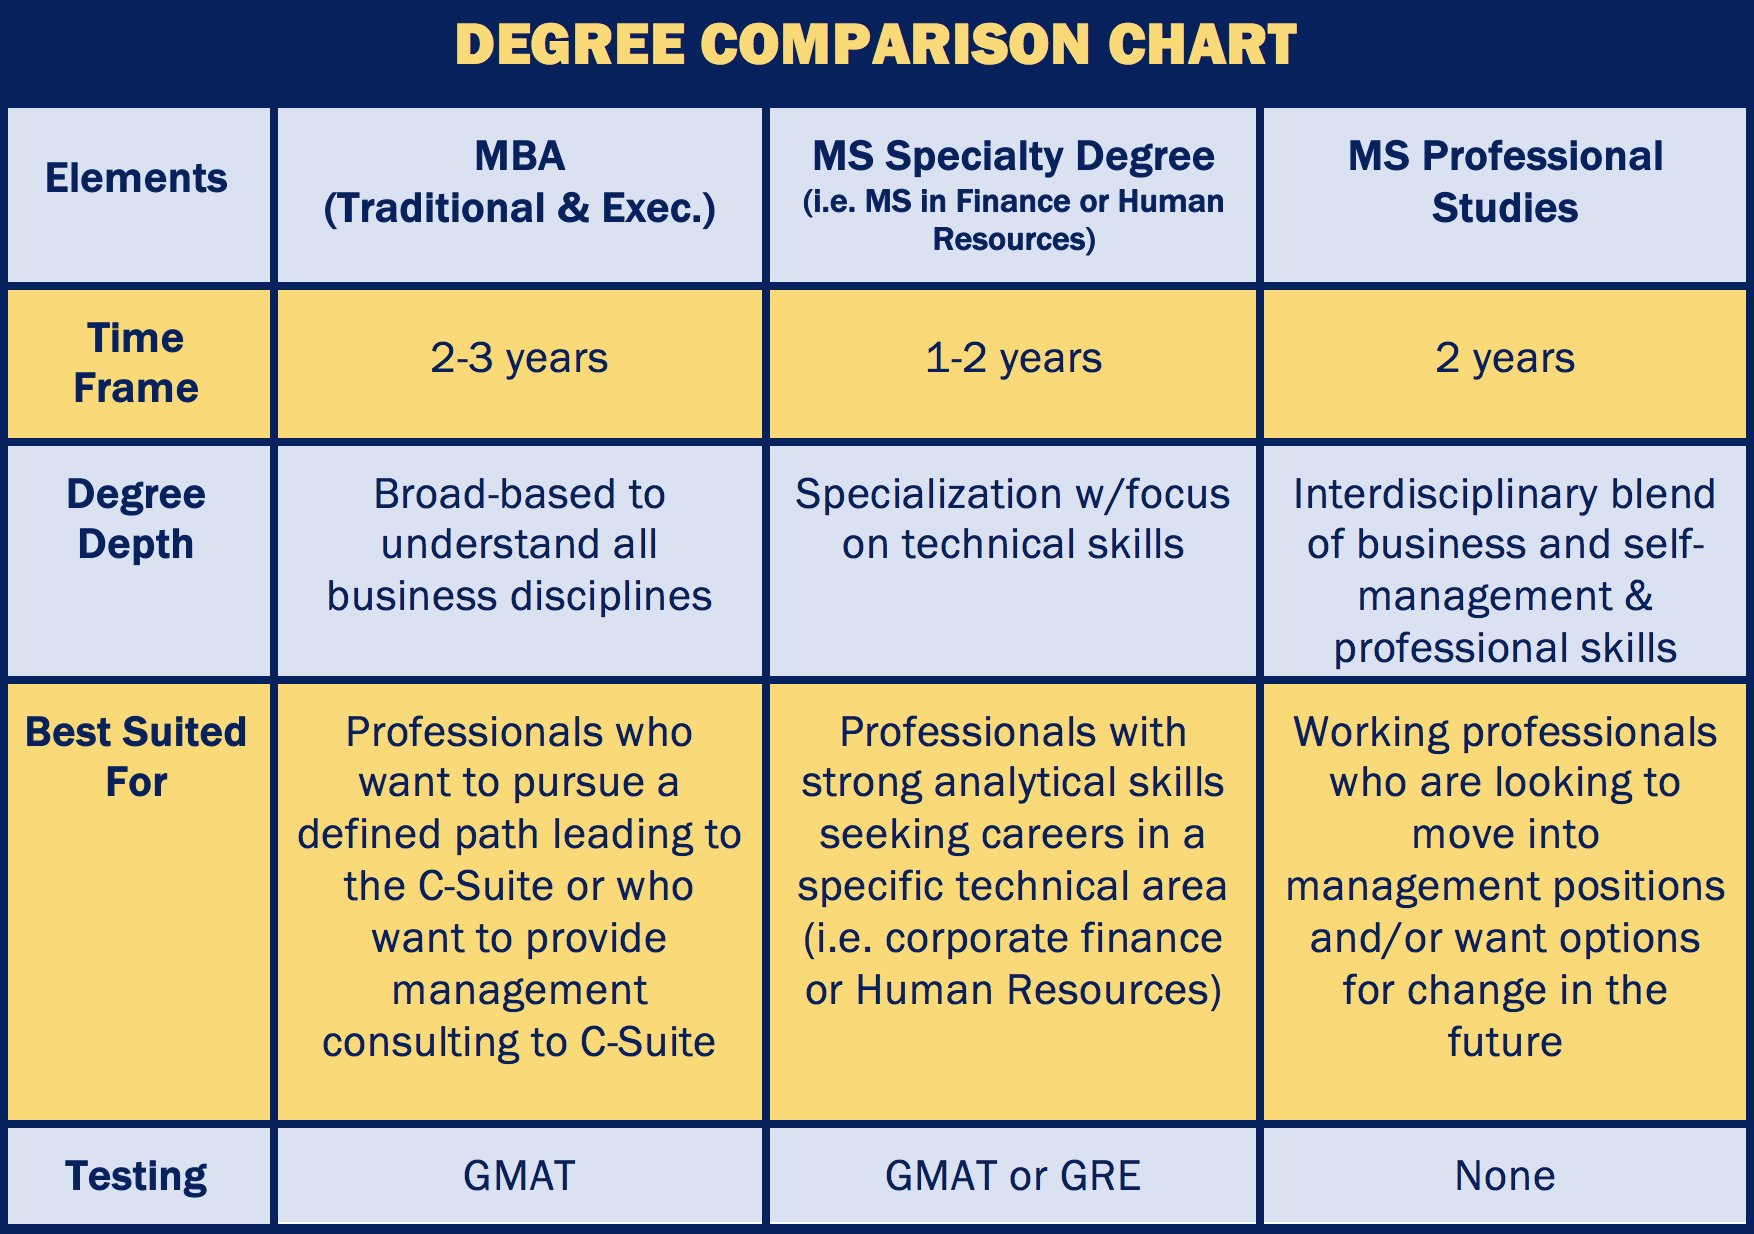 Chart outlining differences between MBA, MS in Finance, and MS in Professional Studies Degrees